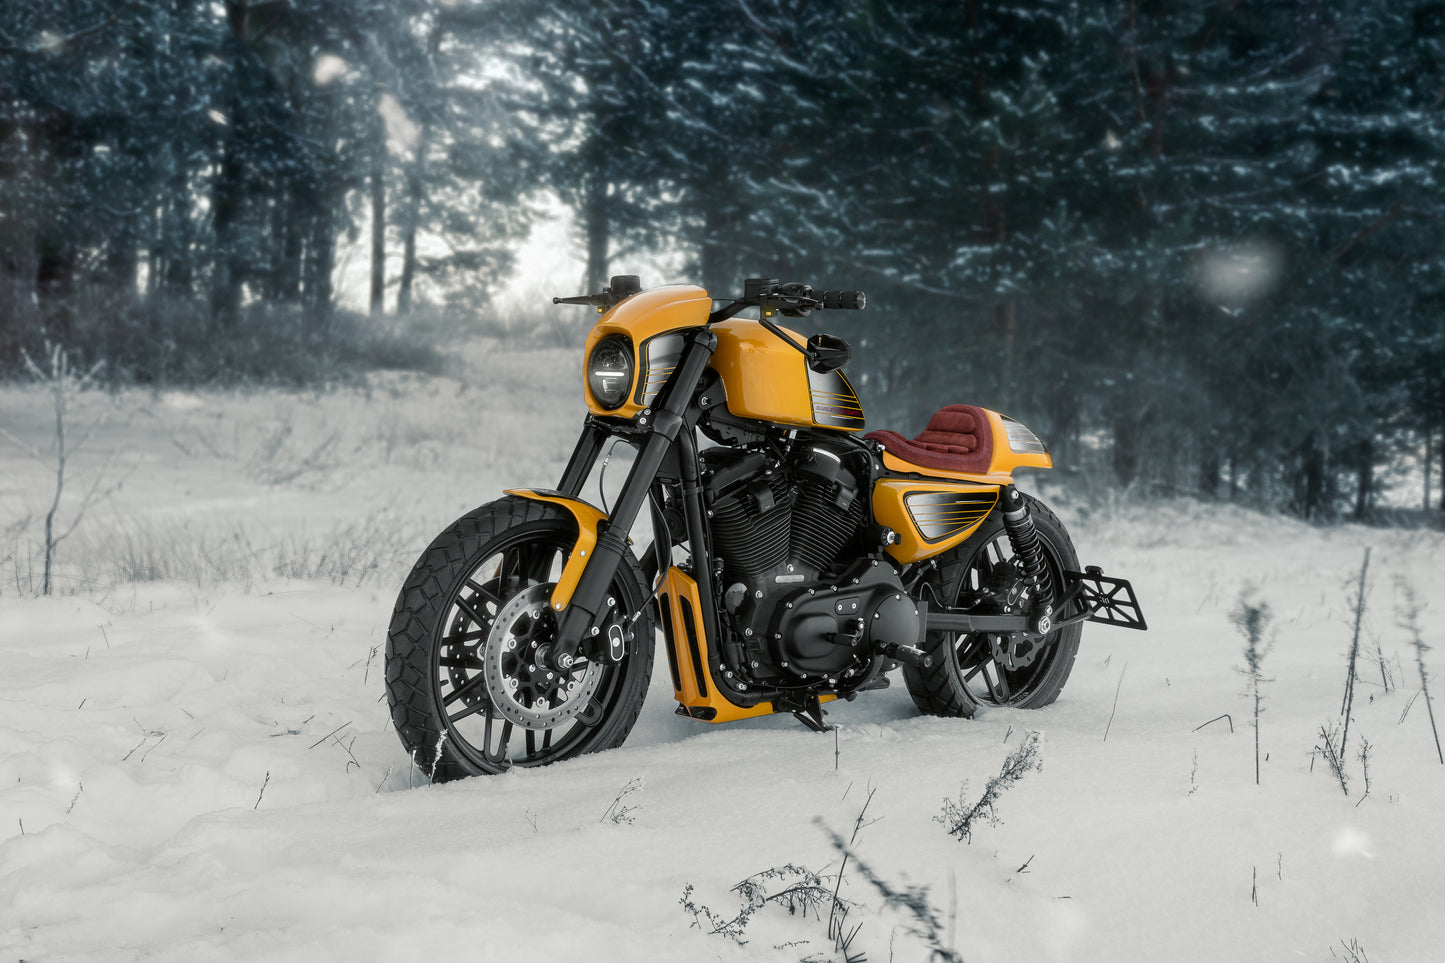 Harley Davidson motorcycle with Killer Custom license plate bracket from the side on a snowy day in the forest